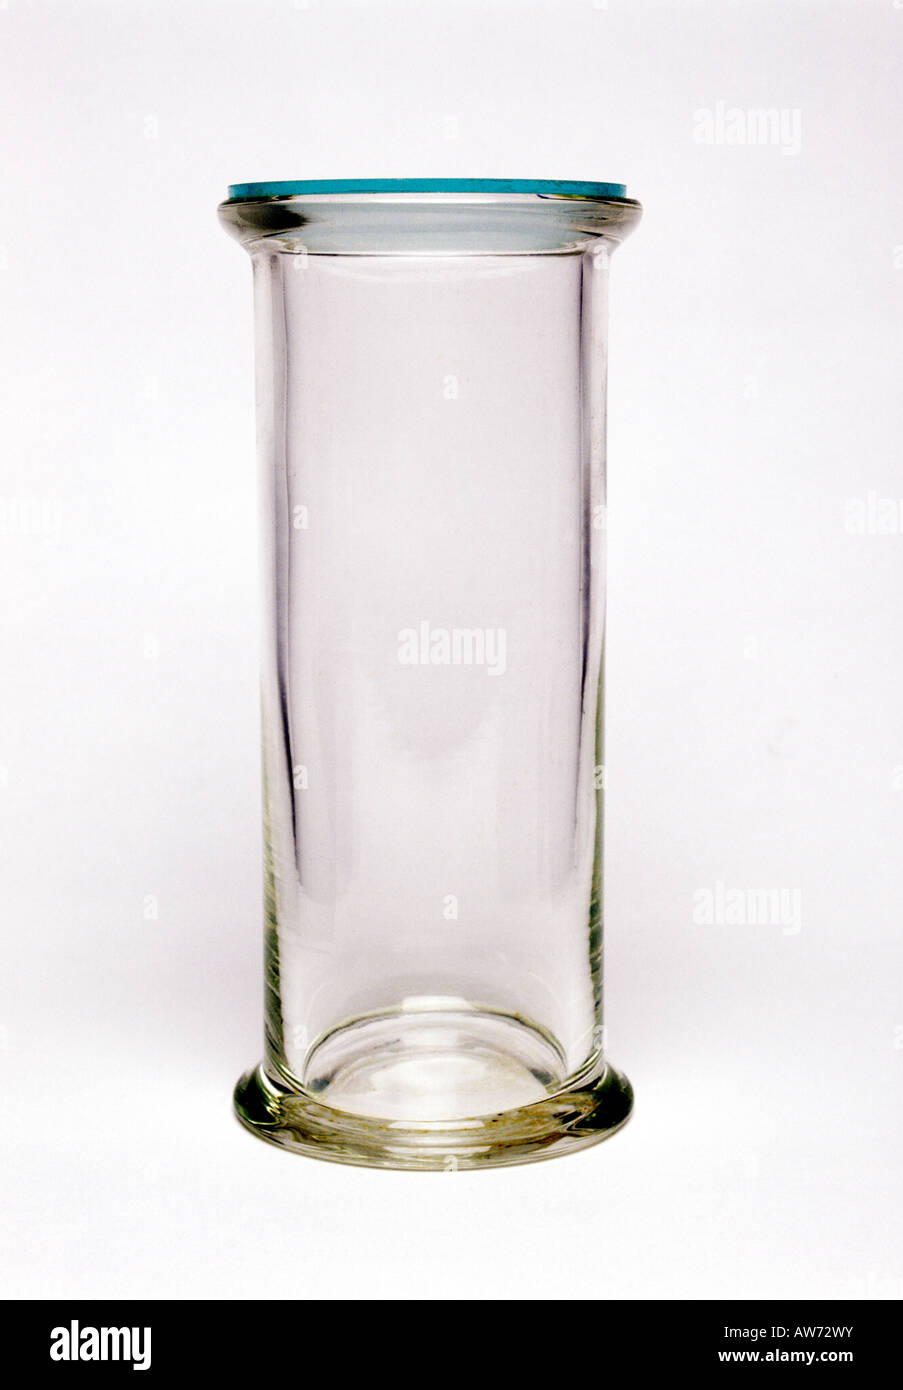 A gas jar full of air with ground glass lid Stock Photo